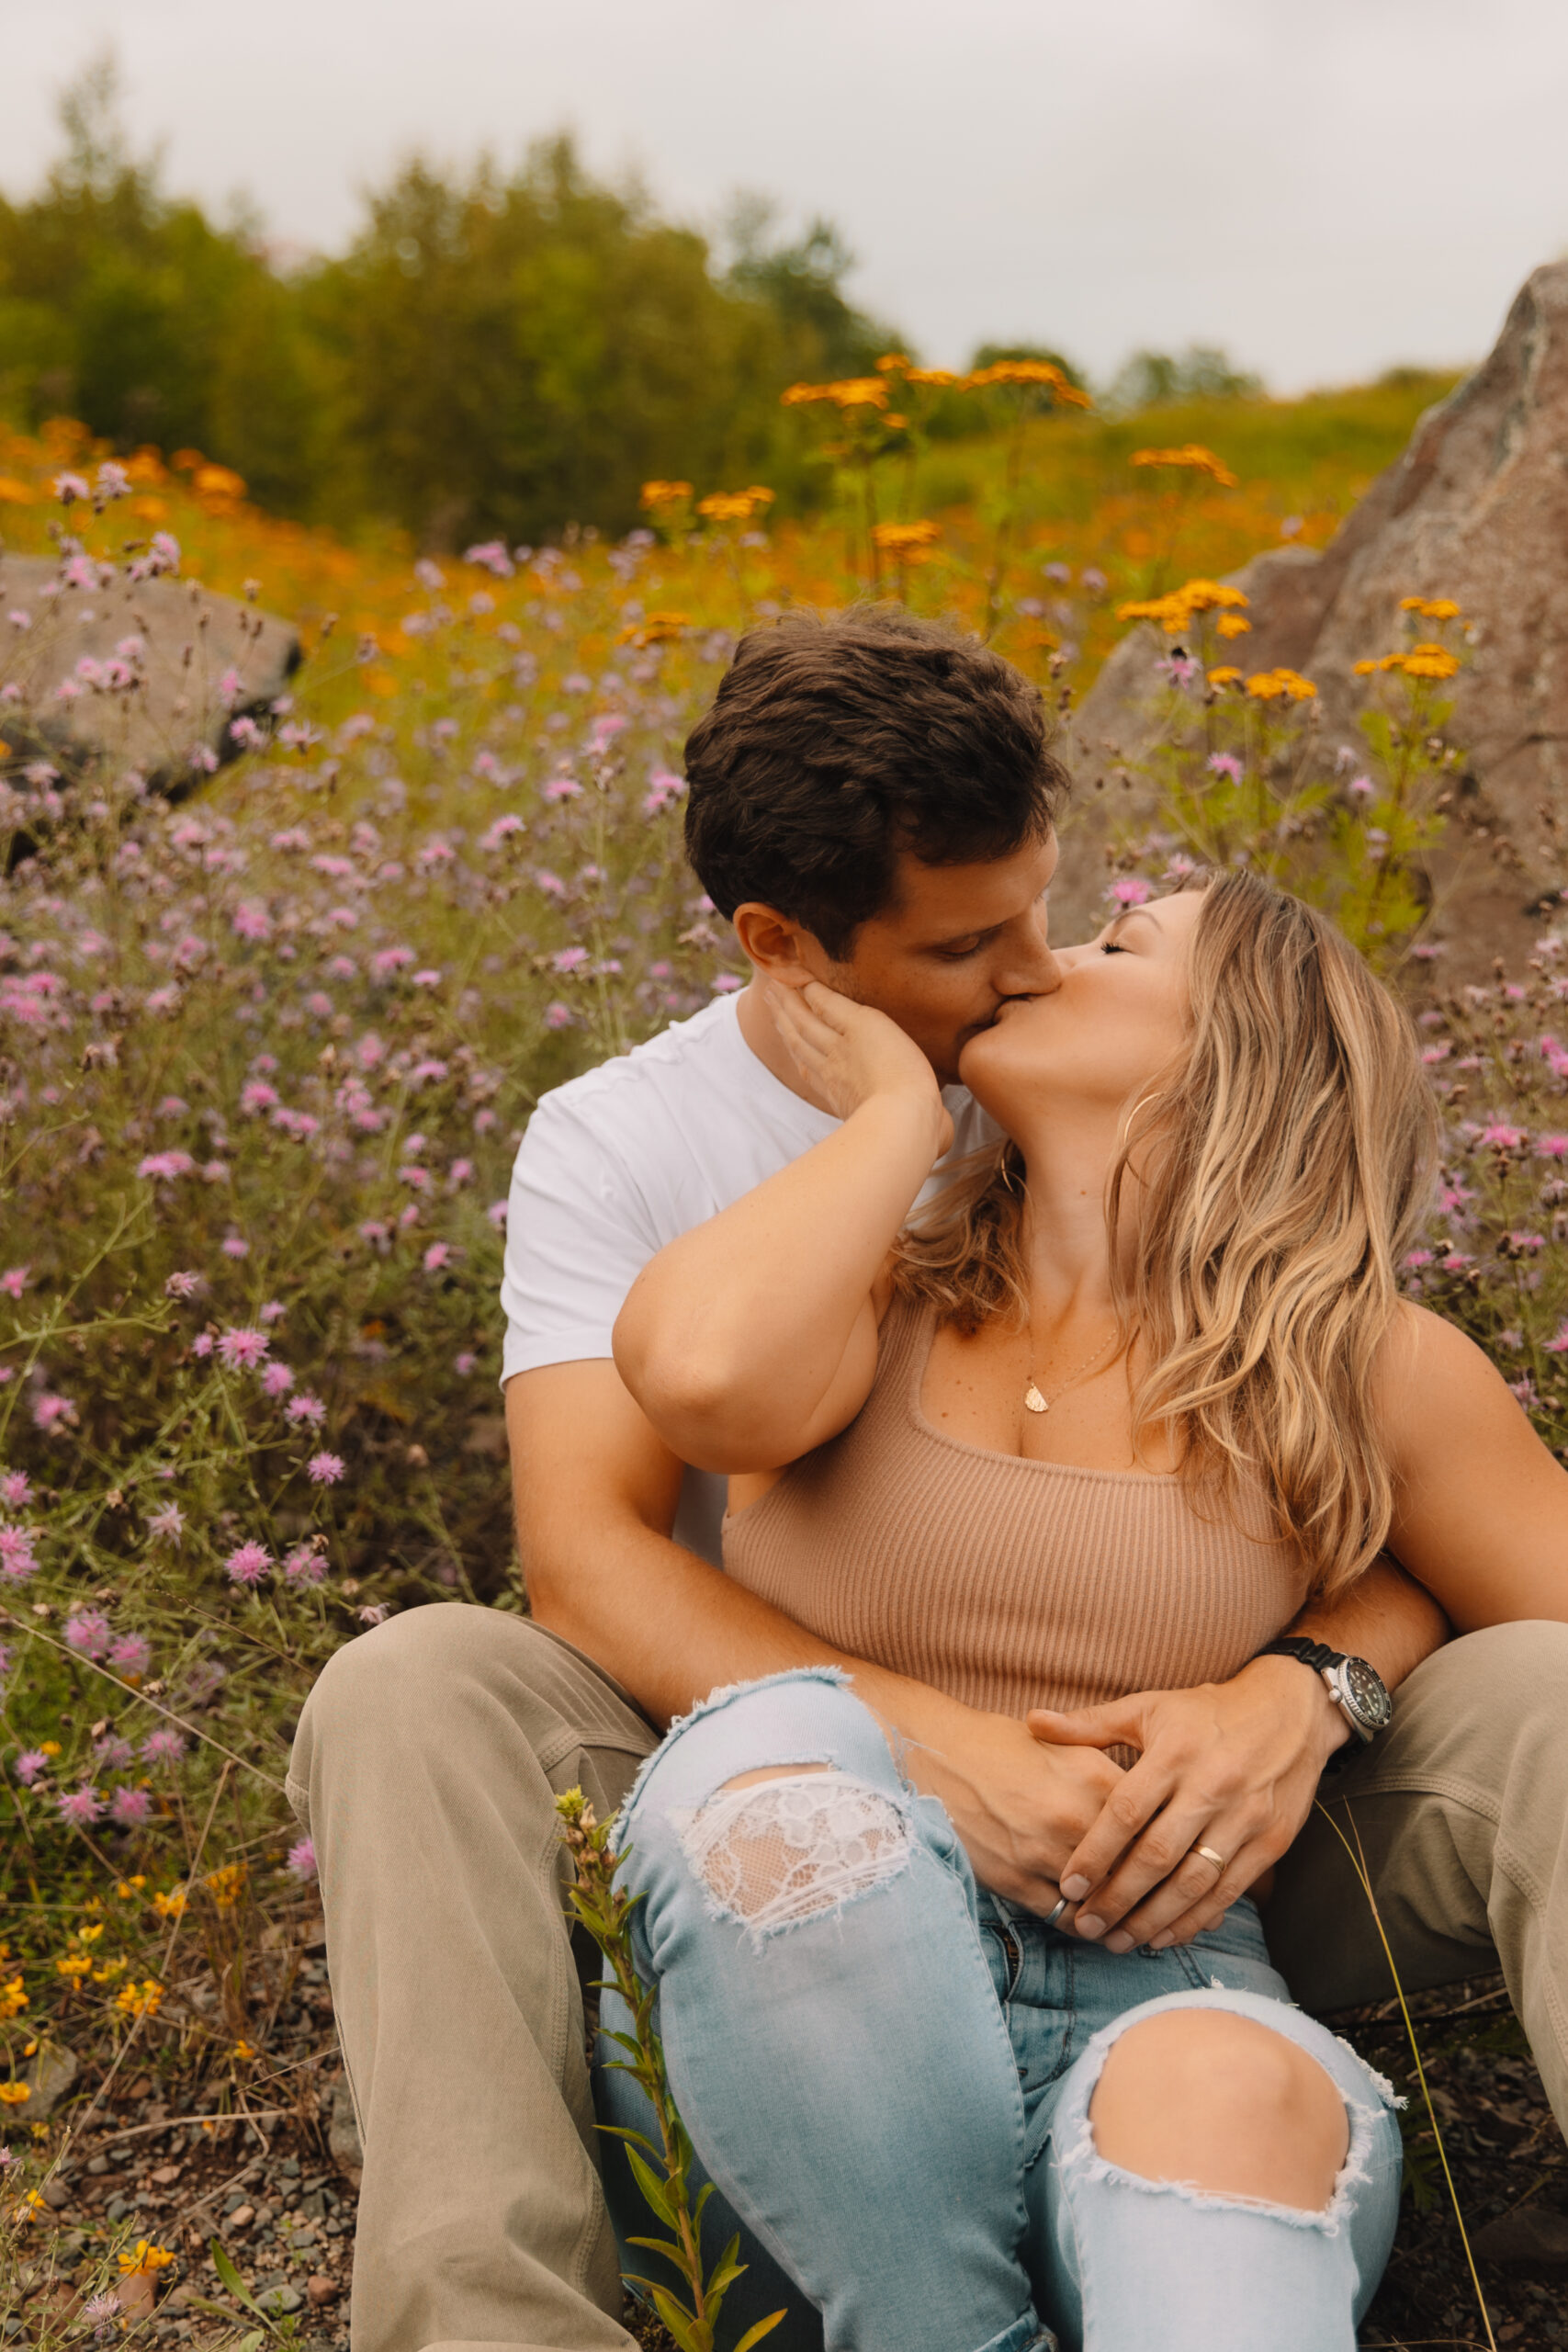 A couple sits among wildflowers and rocks, with the man embracing the woman from behind as they kiss.